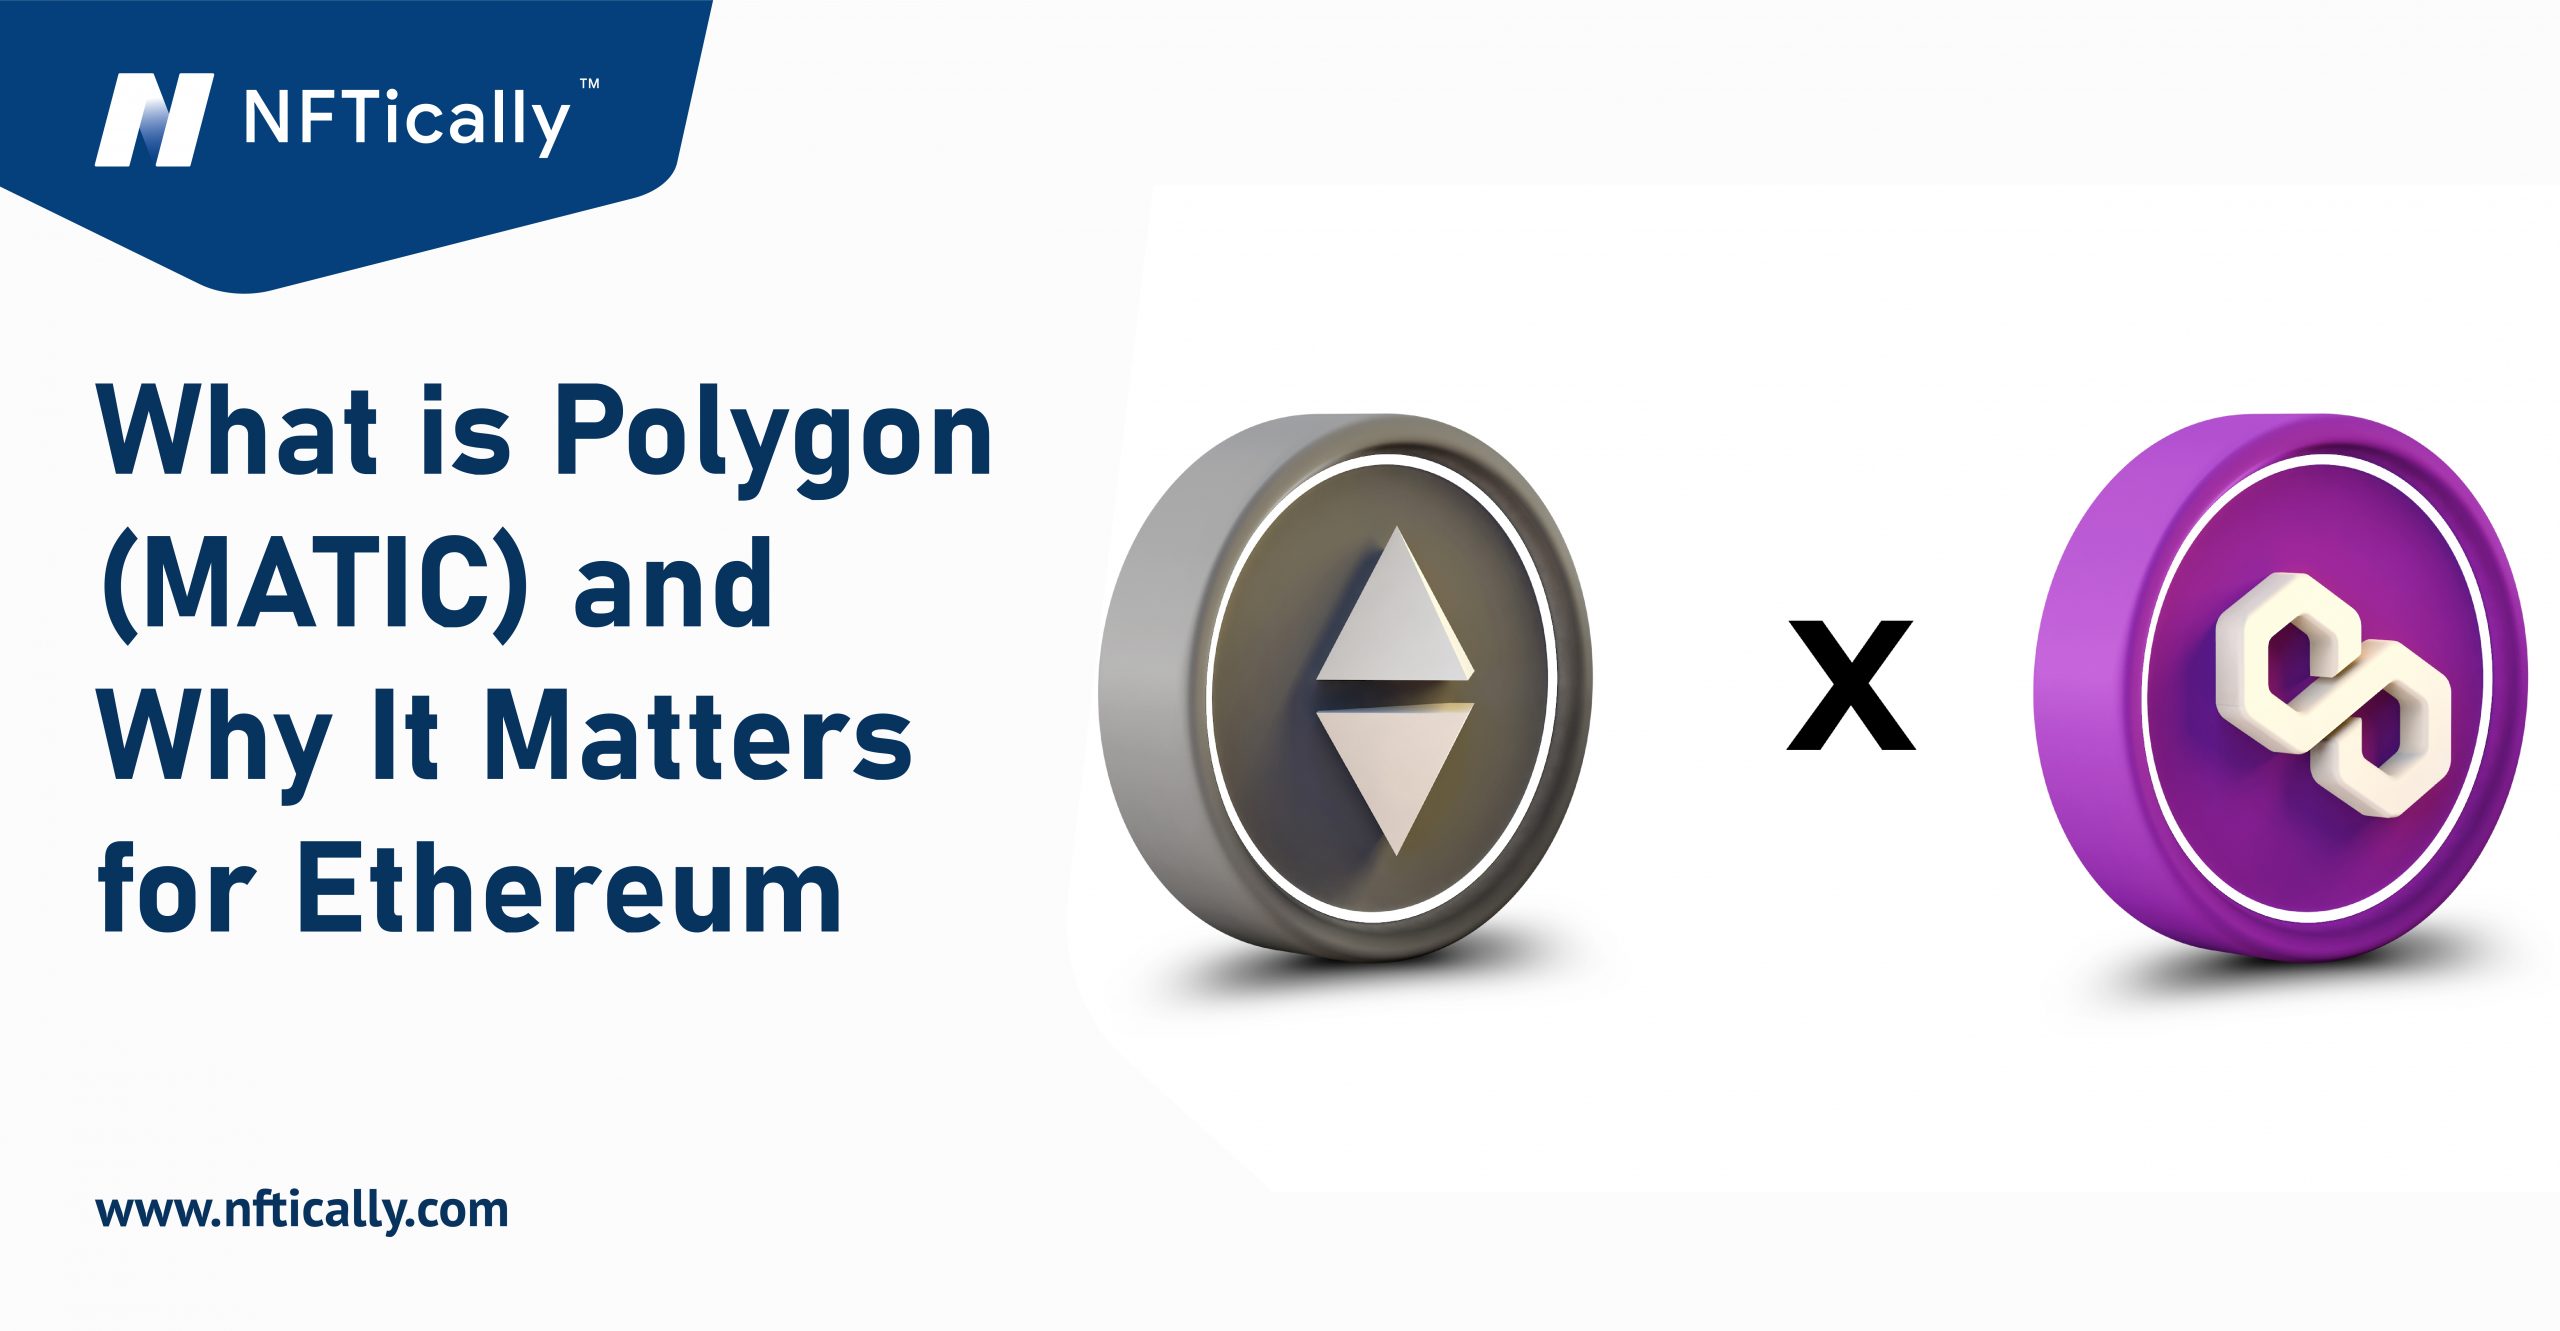 What is Polygon (MATIC) and Why It Matters for Ethereum?